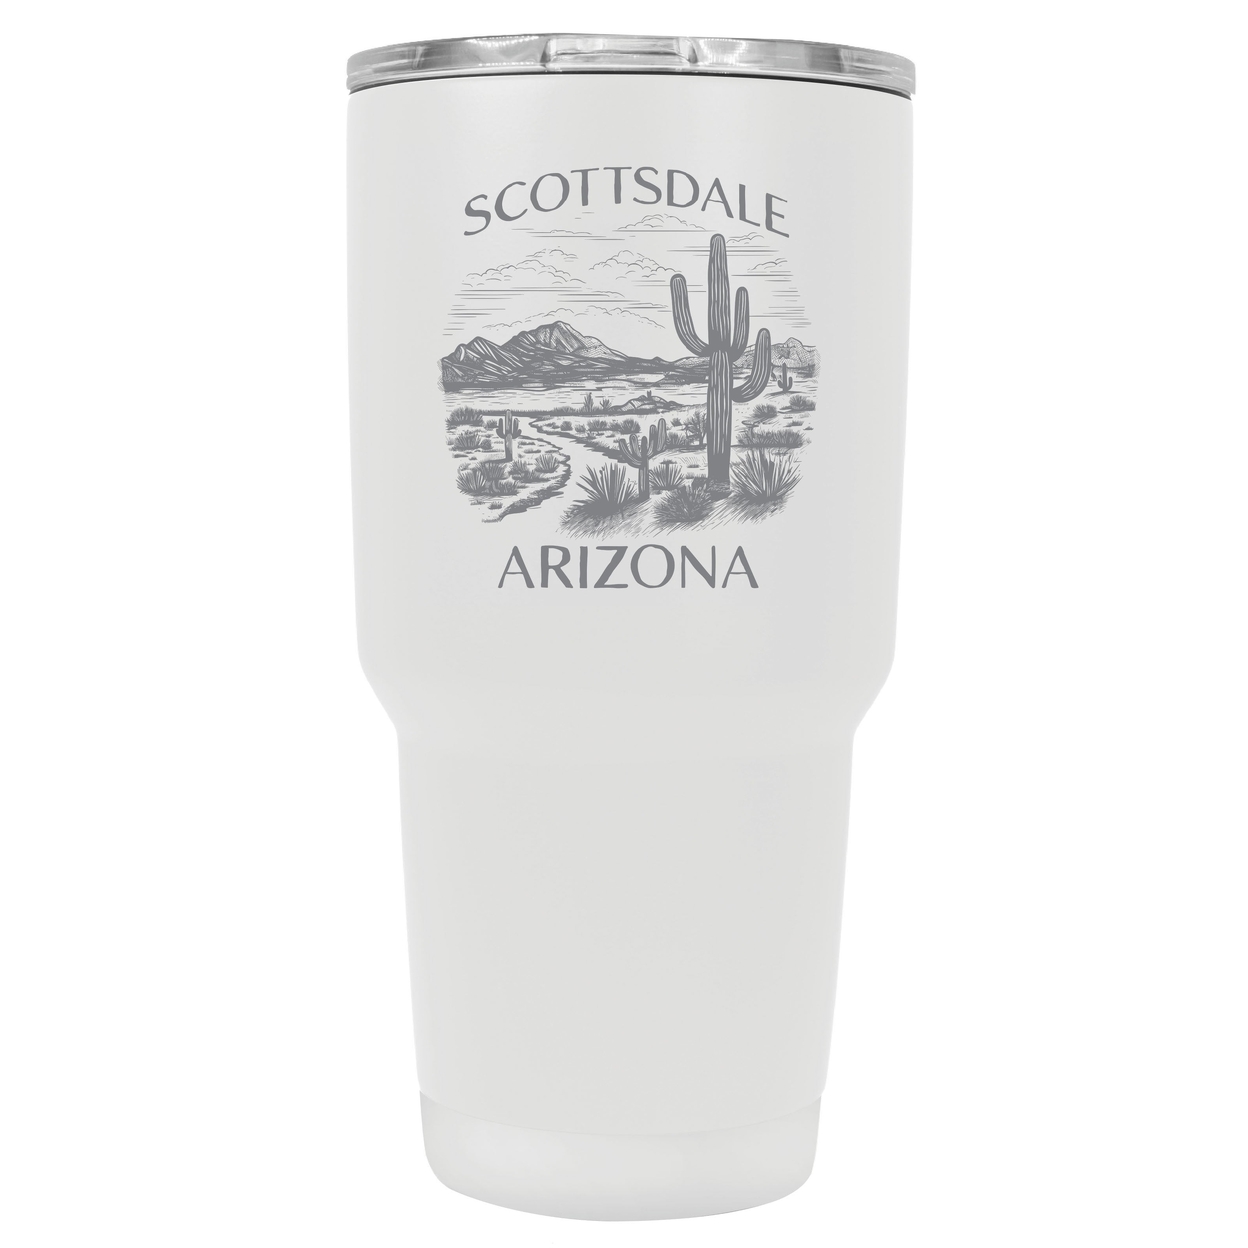 Scottsdale Arizona Souvenir 24 Oz Engraved Insulated Stainless Steel Tumbler - Rose Gold,,4-Pack